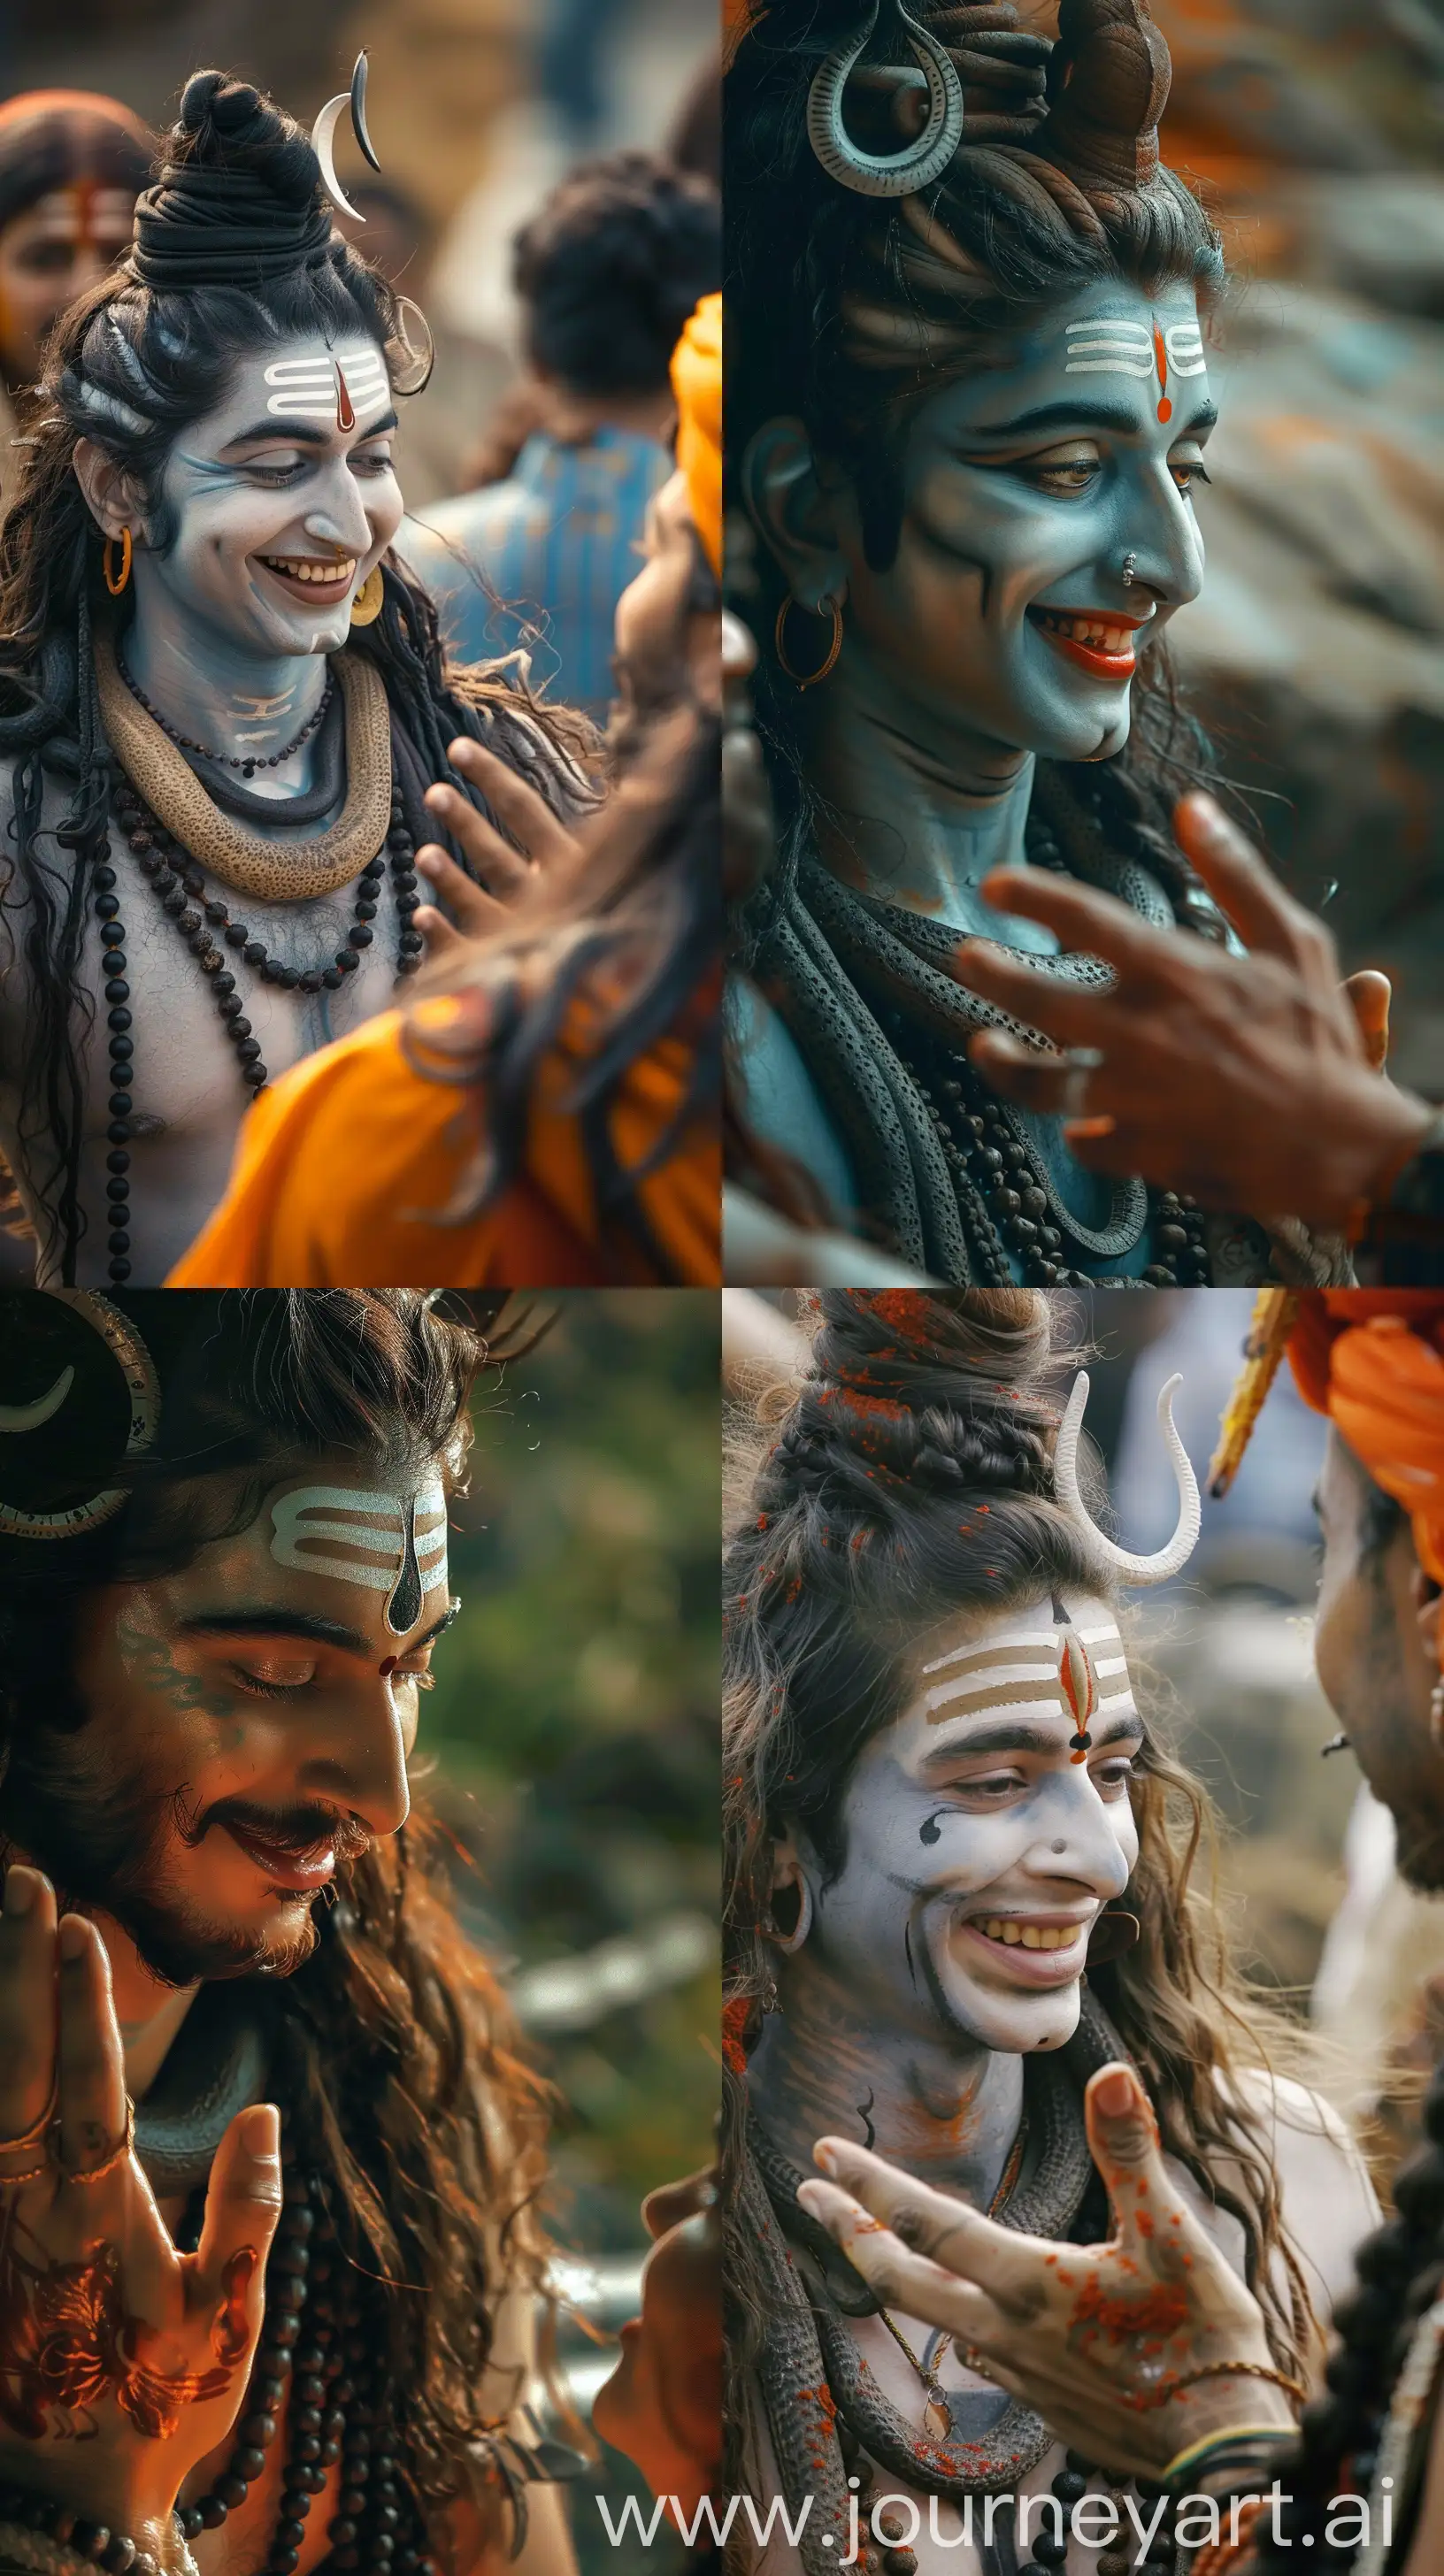 Lord-Shiva-Engaging-in-Friendly-Conversation-CloseUp-Portrait-with-Smiling-Expression-and-Gestures